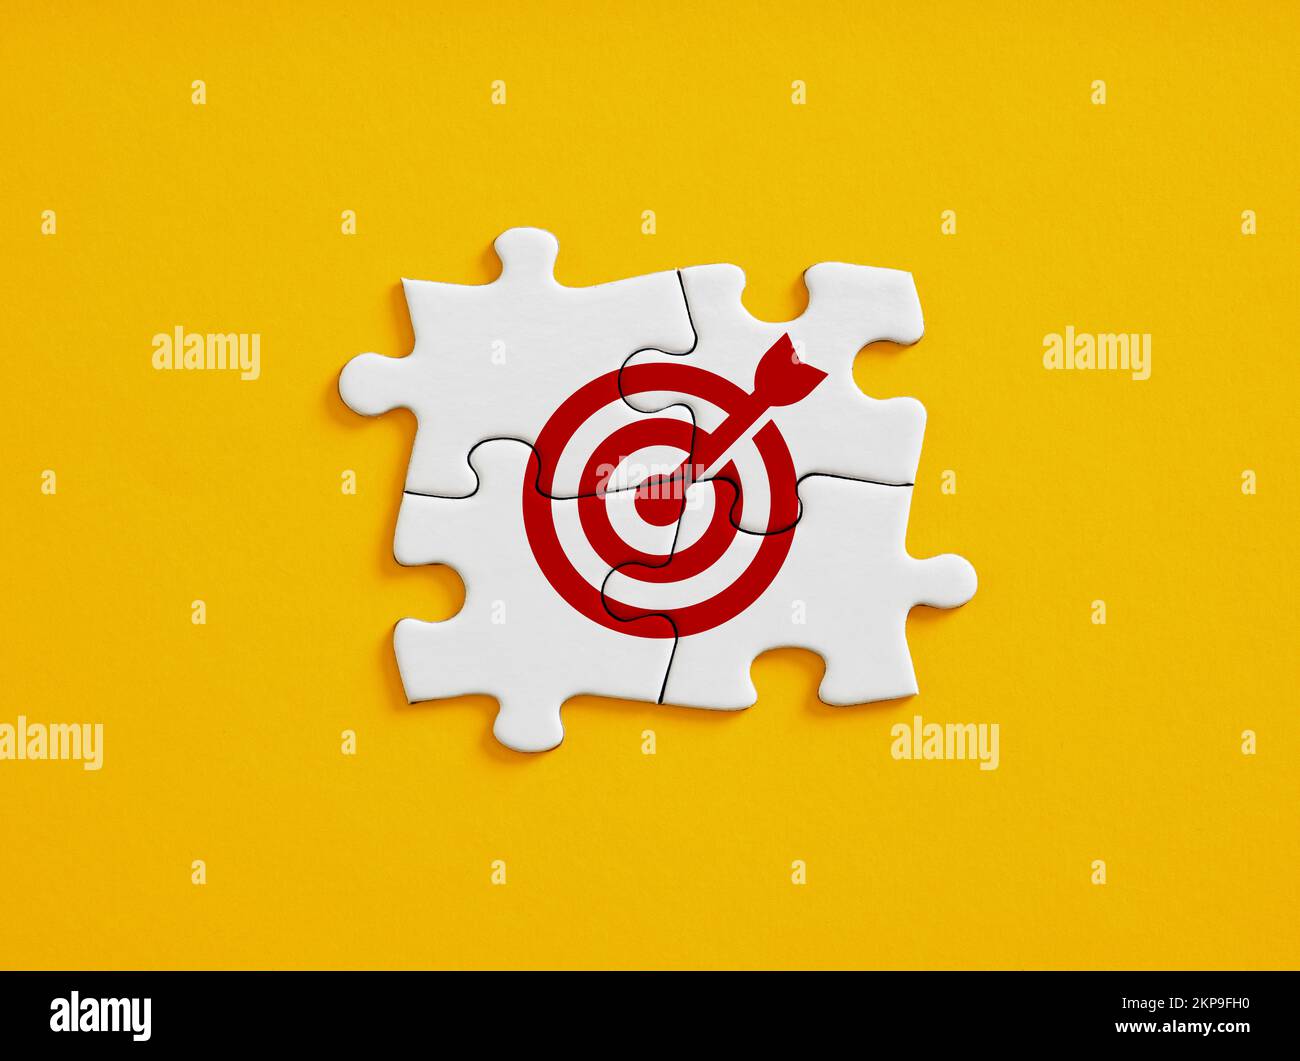 Joint effort or teamwork for achieving target goal objectives in business. Initiation and synergy to reach target. Objective, goal or target icon on c Stock Photo